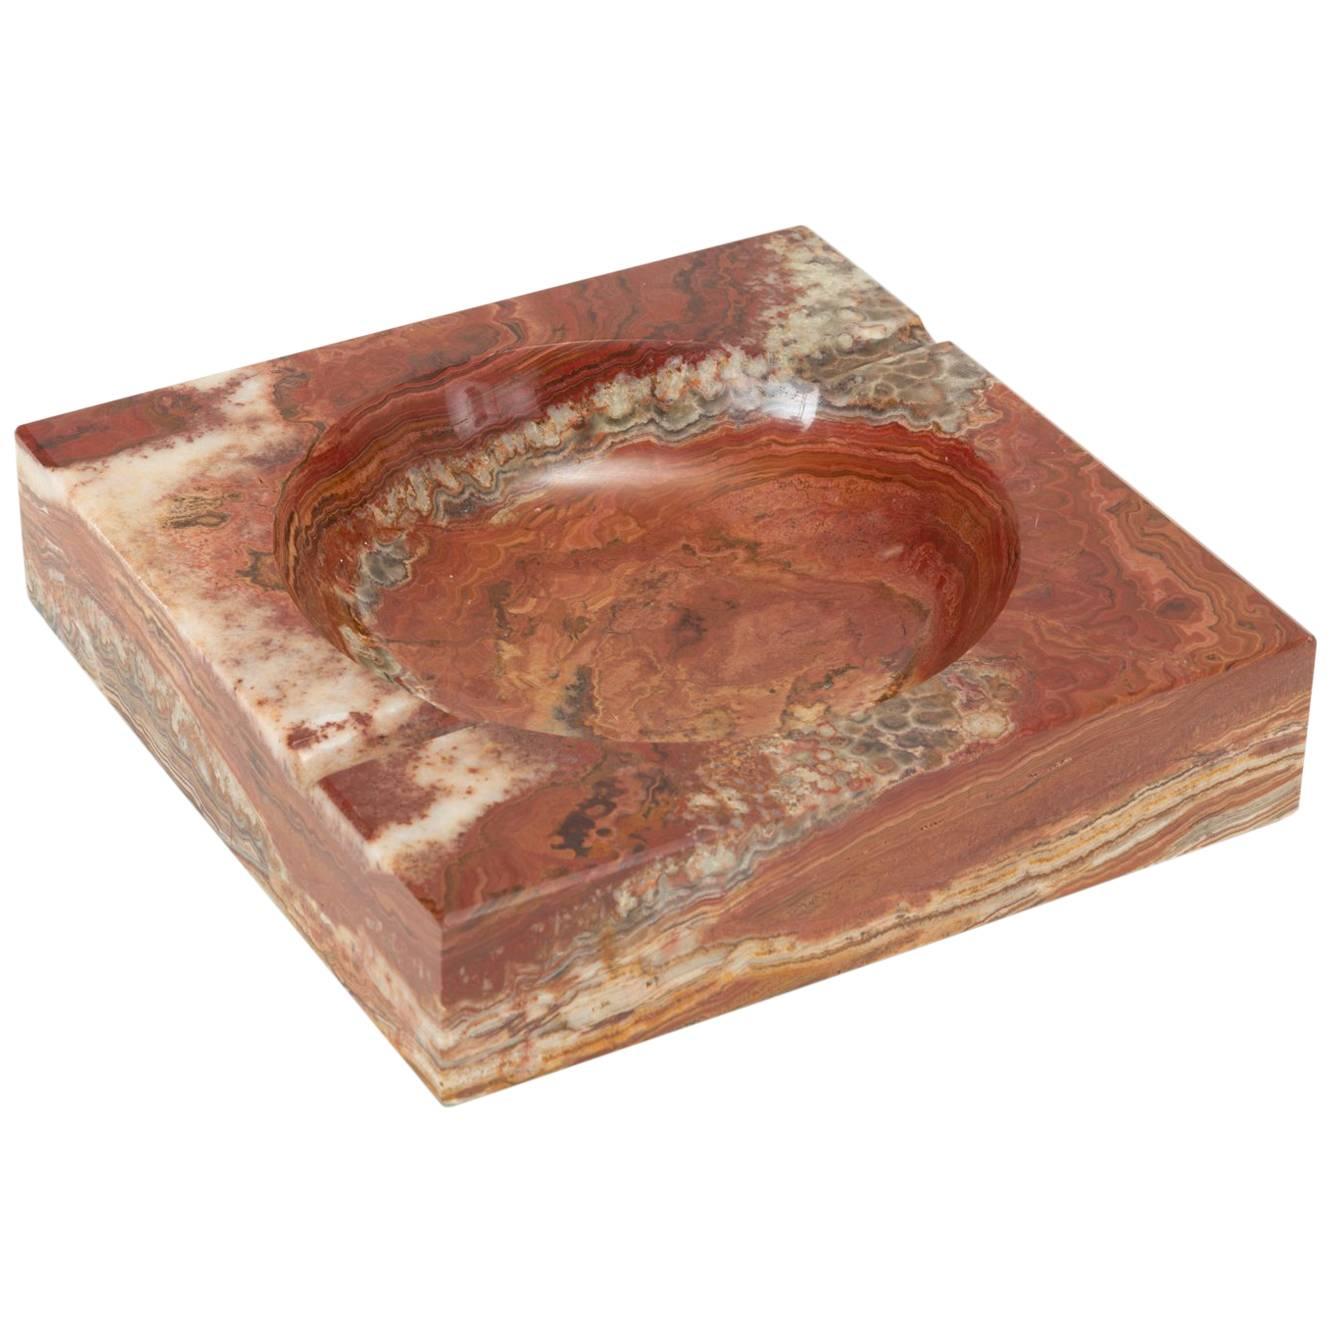 Vintage Square Ashtray in Red Marble